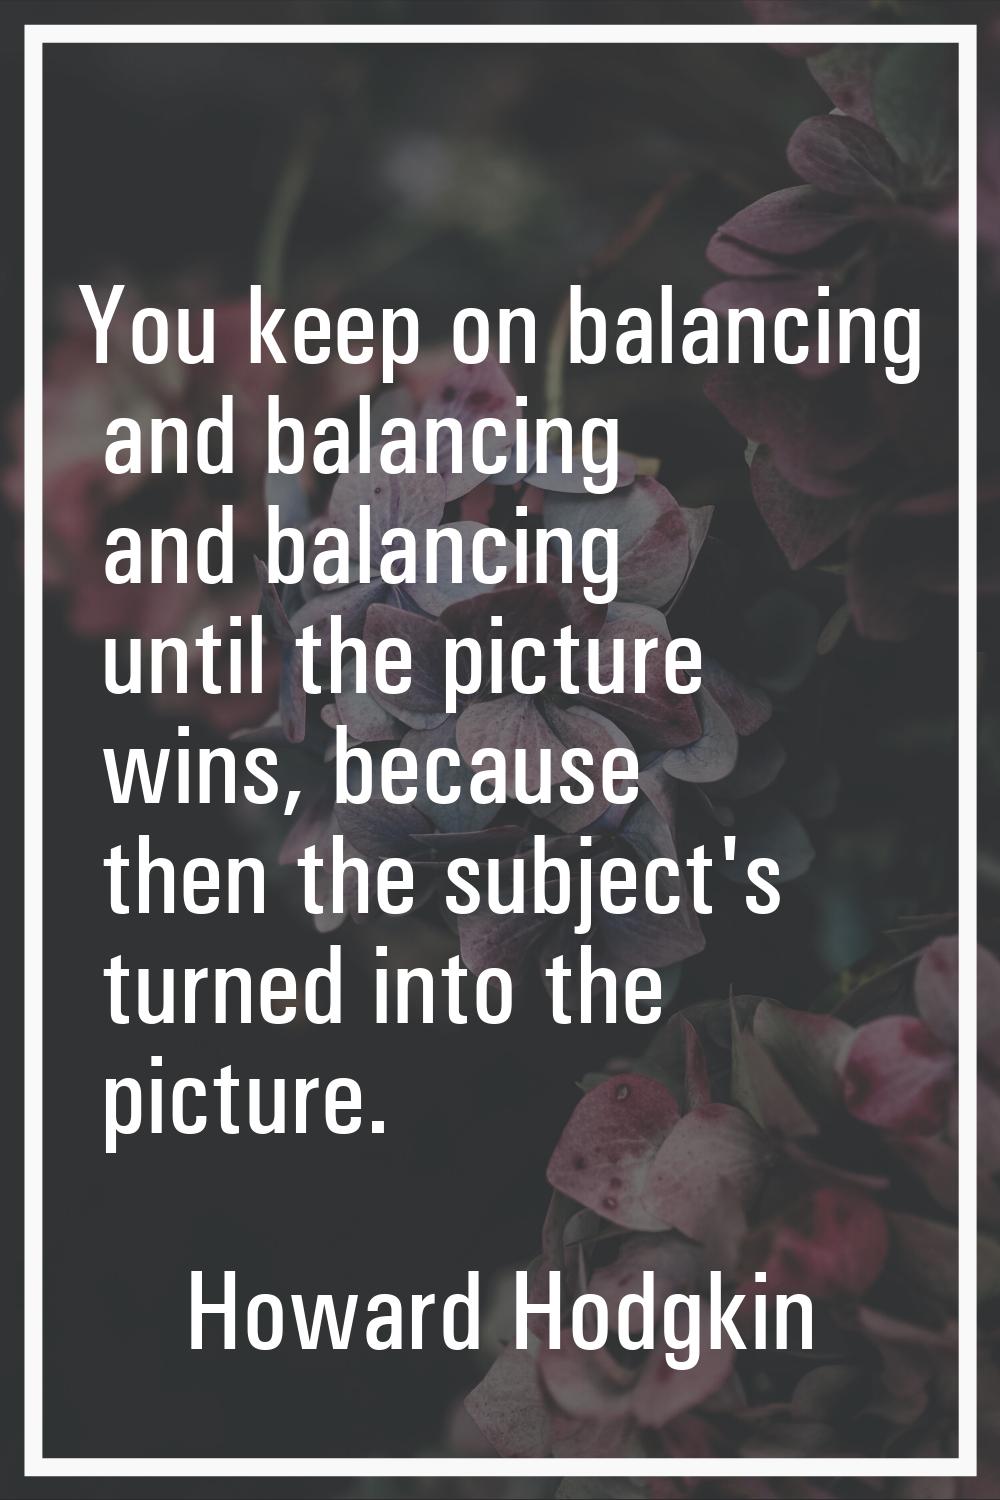 You keep on balancing and balancing and balancing until the picture wins, because then the subject'